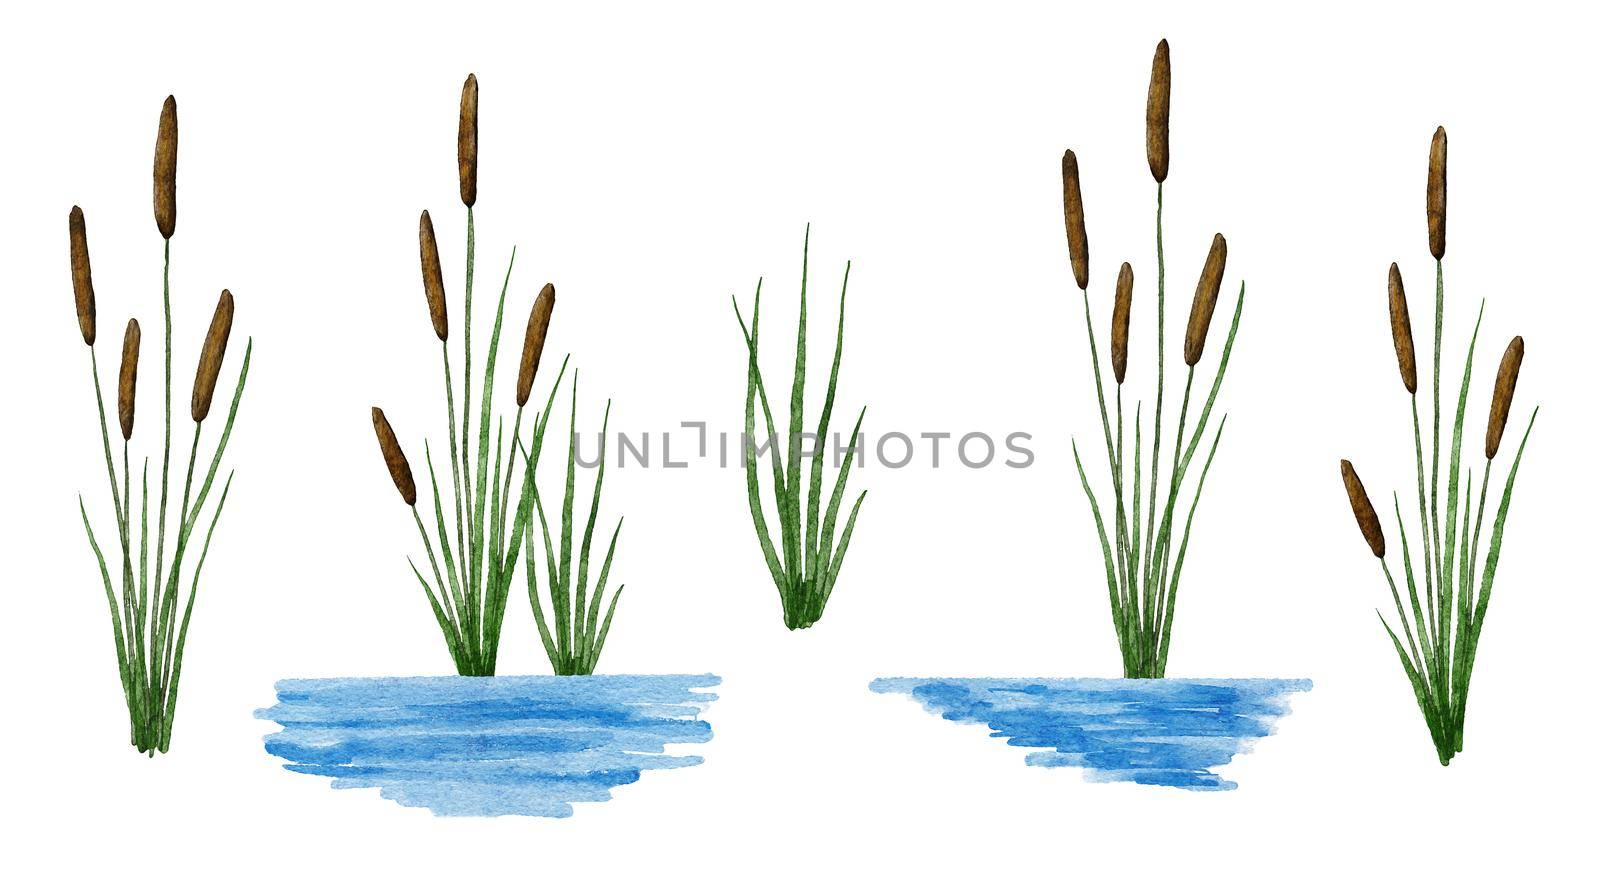 Watercolor hand drawn illustration of typha reed cattail plant in water river. Flora of wetland swamp march, green leaves brown seeds, outdoor summer spring floral landscape